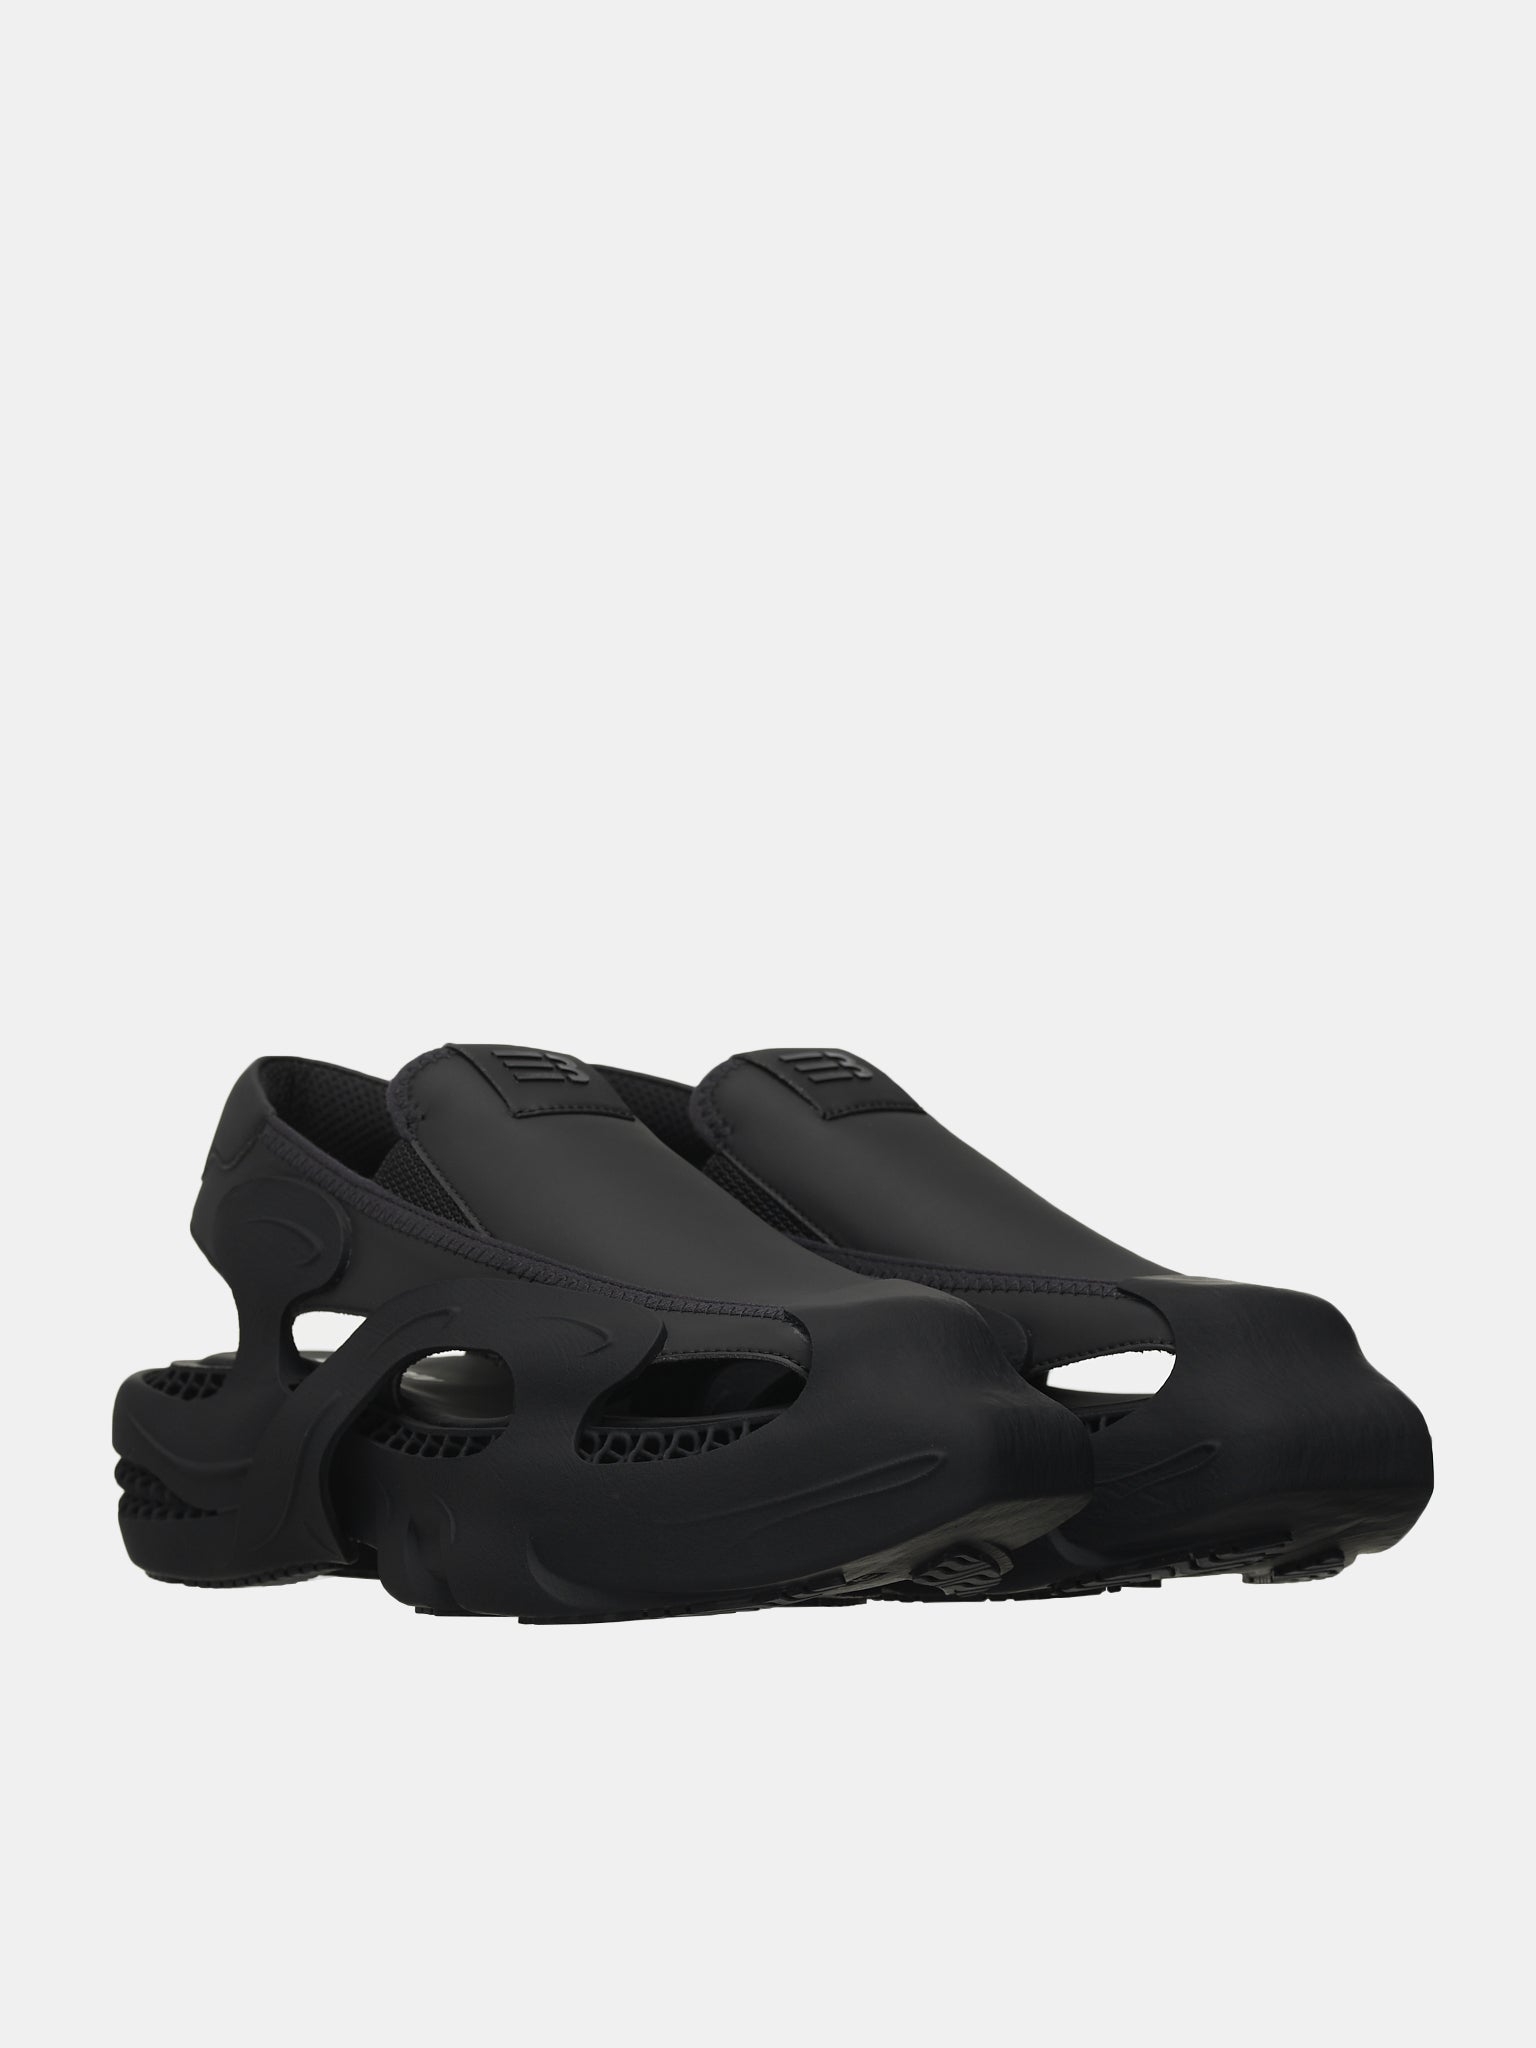 Clippers 3000 Sandals (N3-SS-3000-EUPHORIC-BLACK)